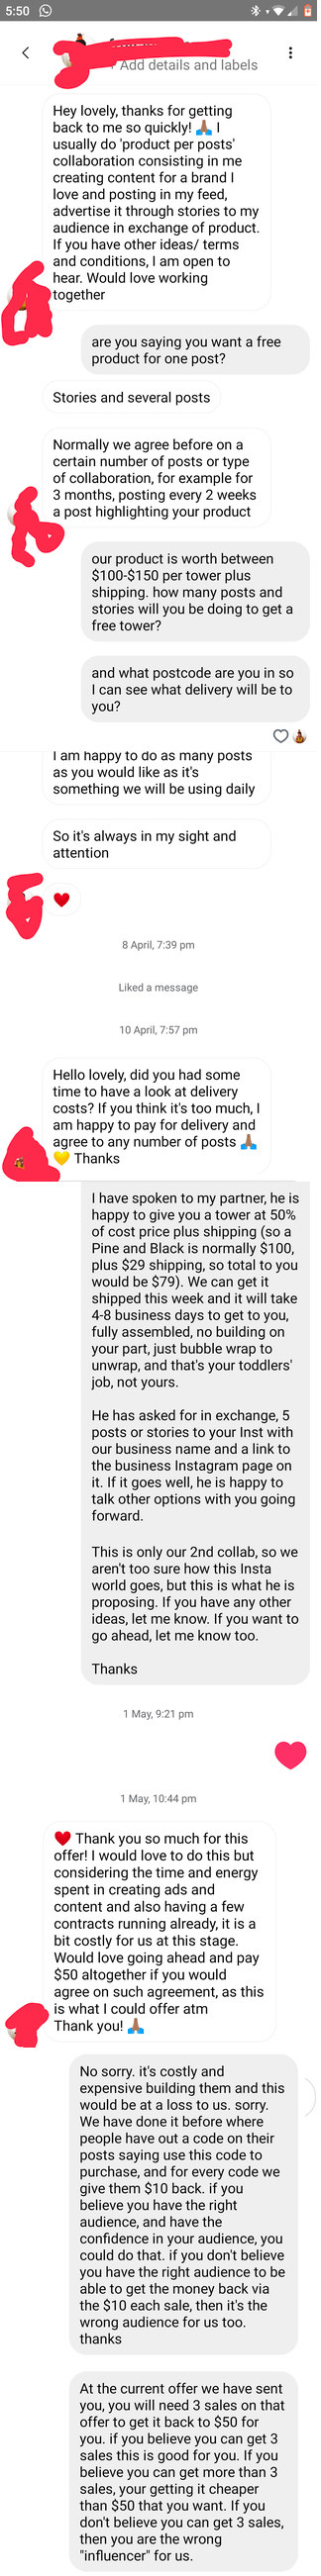 Someone tries to get something free even after being offered a discount code from a small business